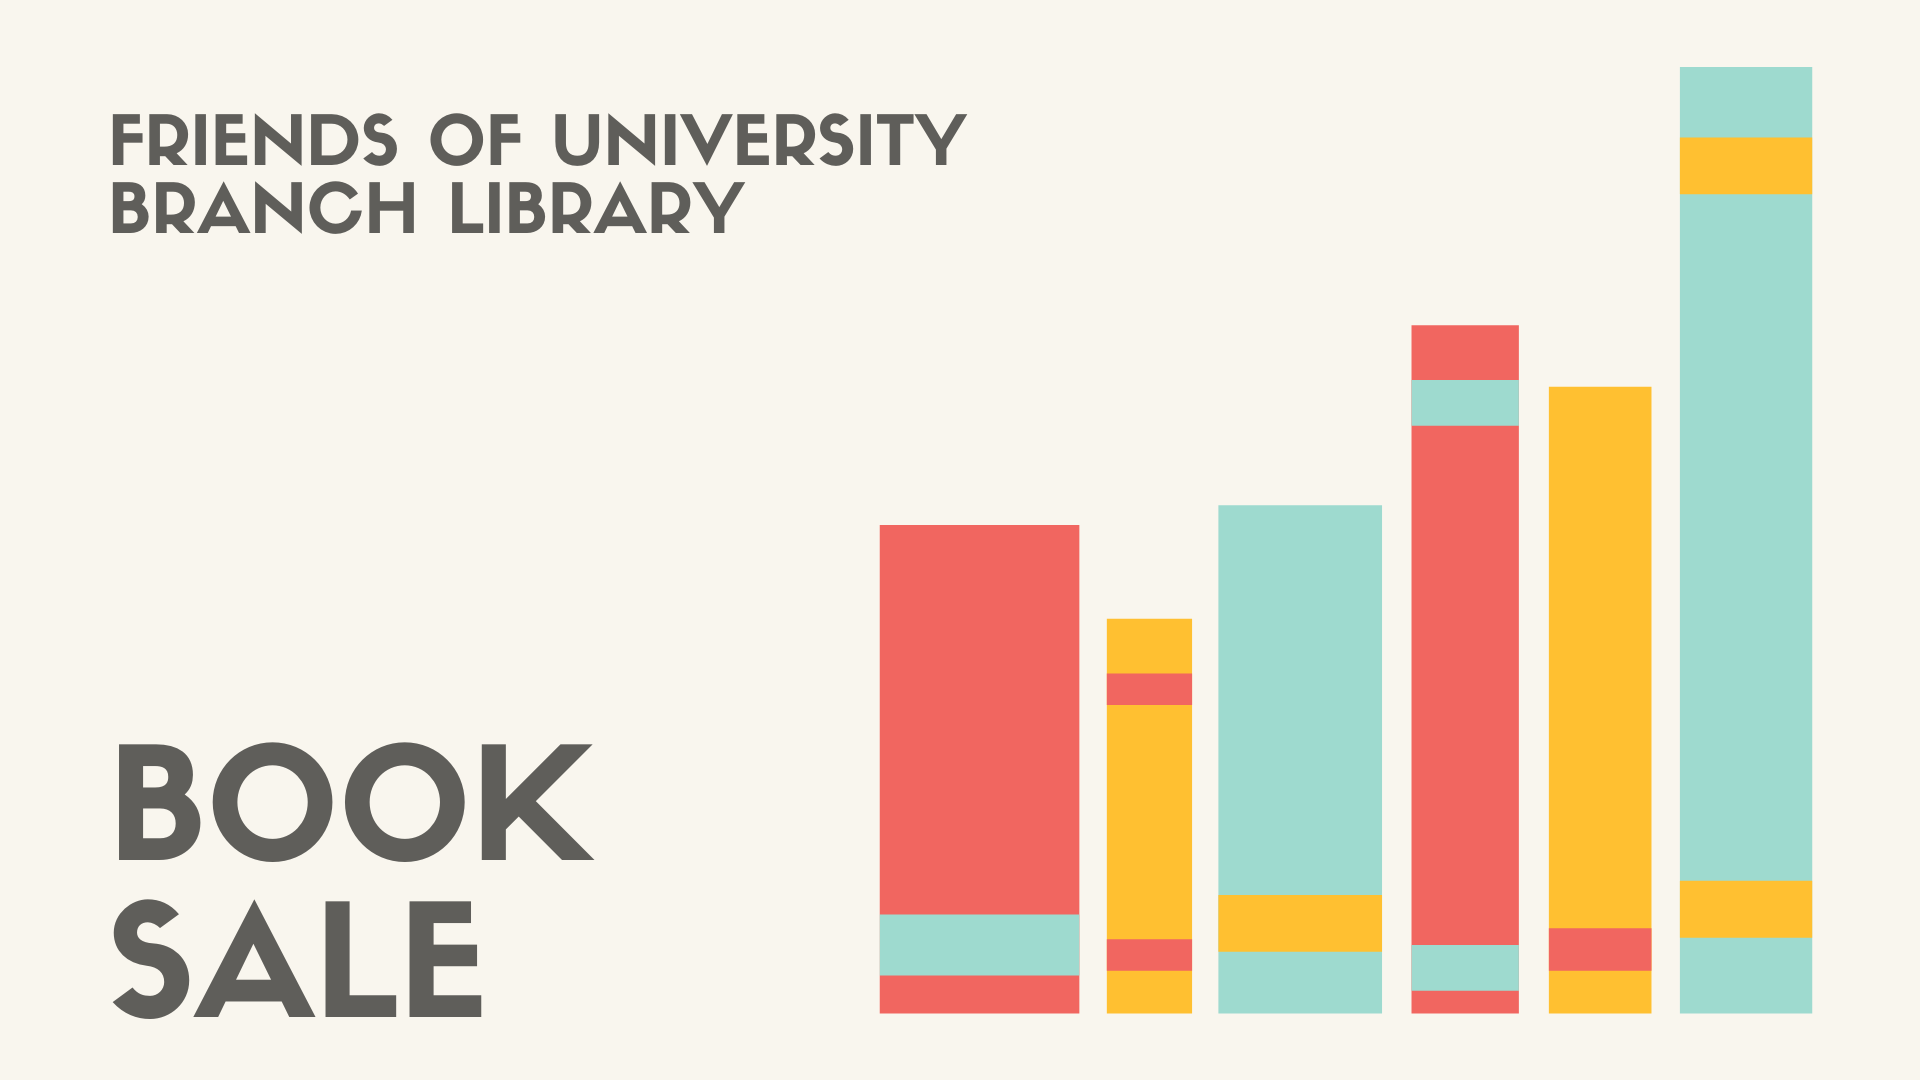 Clip art style row of books, aligned to the right side of the image.  The words "Friends of University Branch Library" appear in the upper left corner.  In the bottom left corner, the words, "book sale" appear.